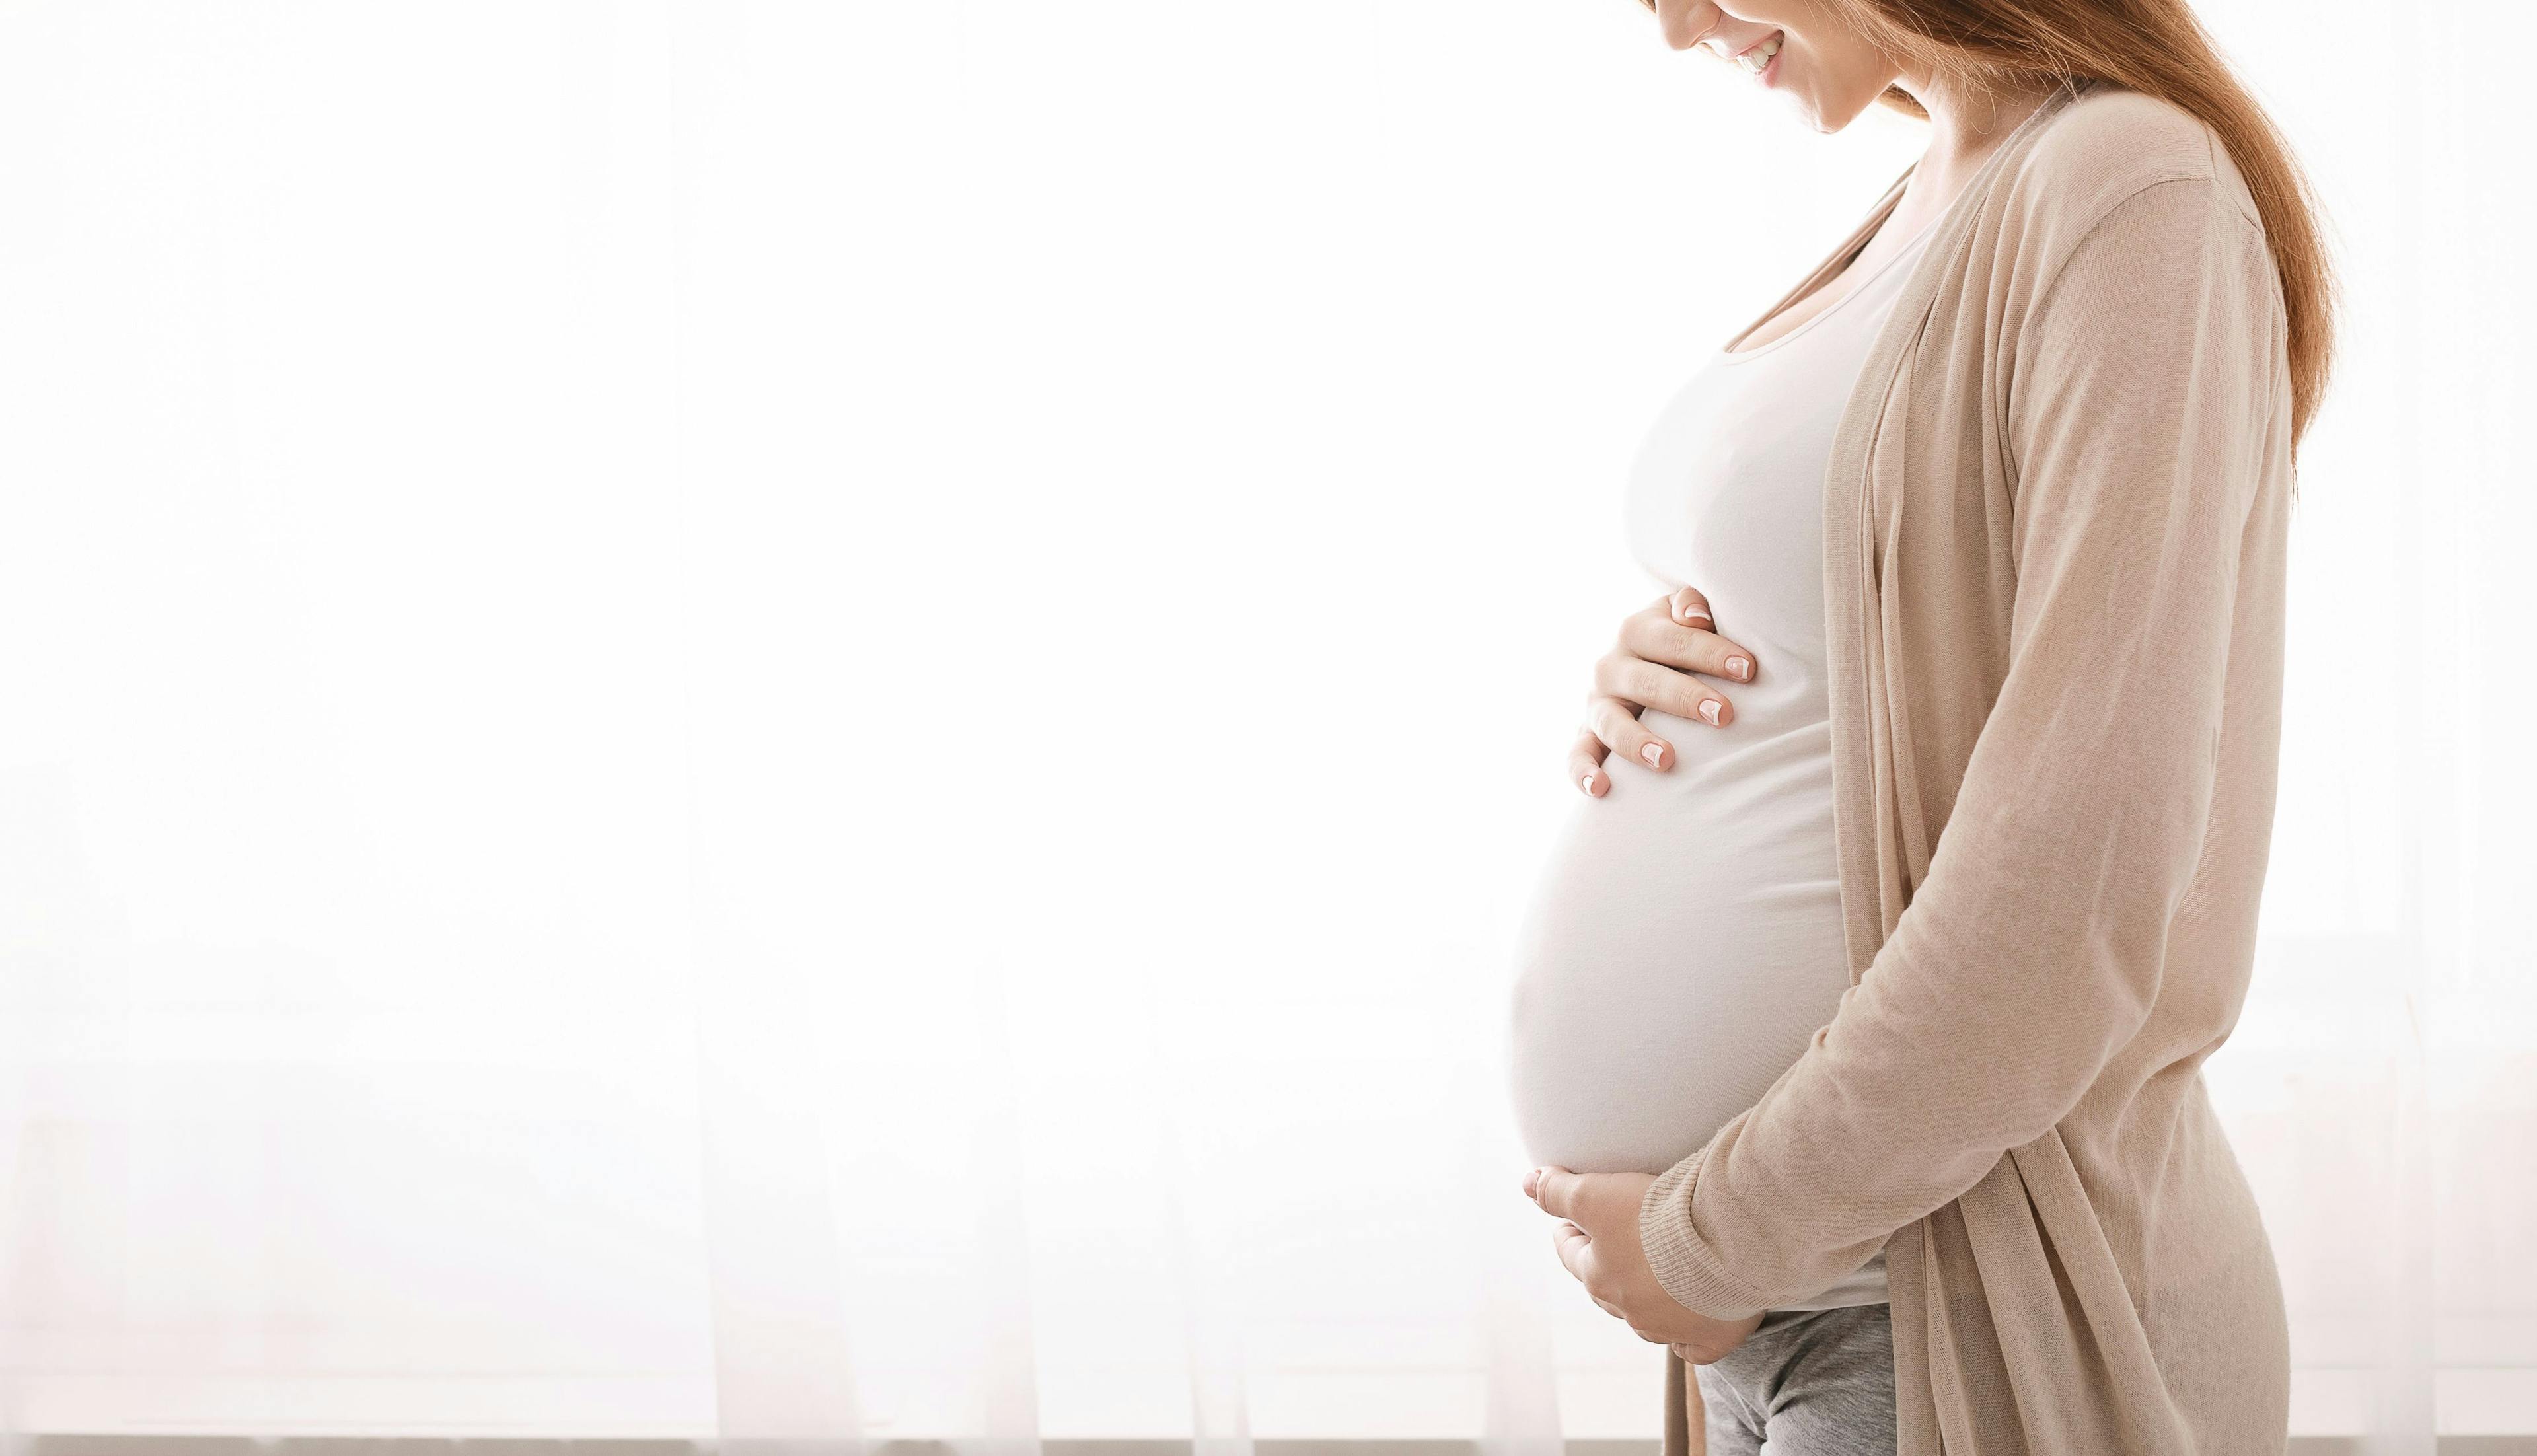 Pregnancy has surprising ocular ties, some rare, some all too common